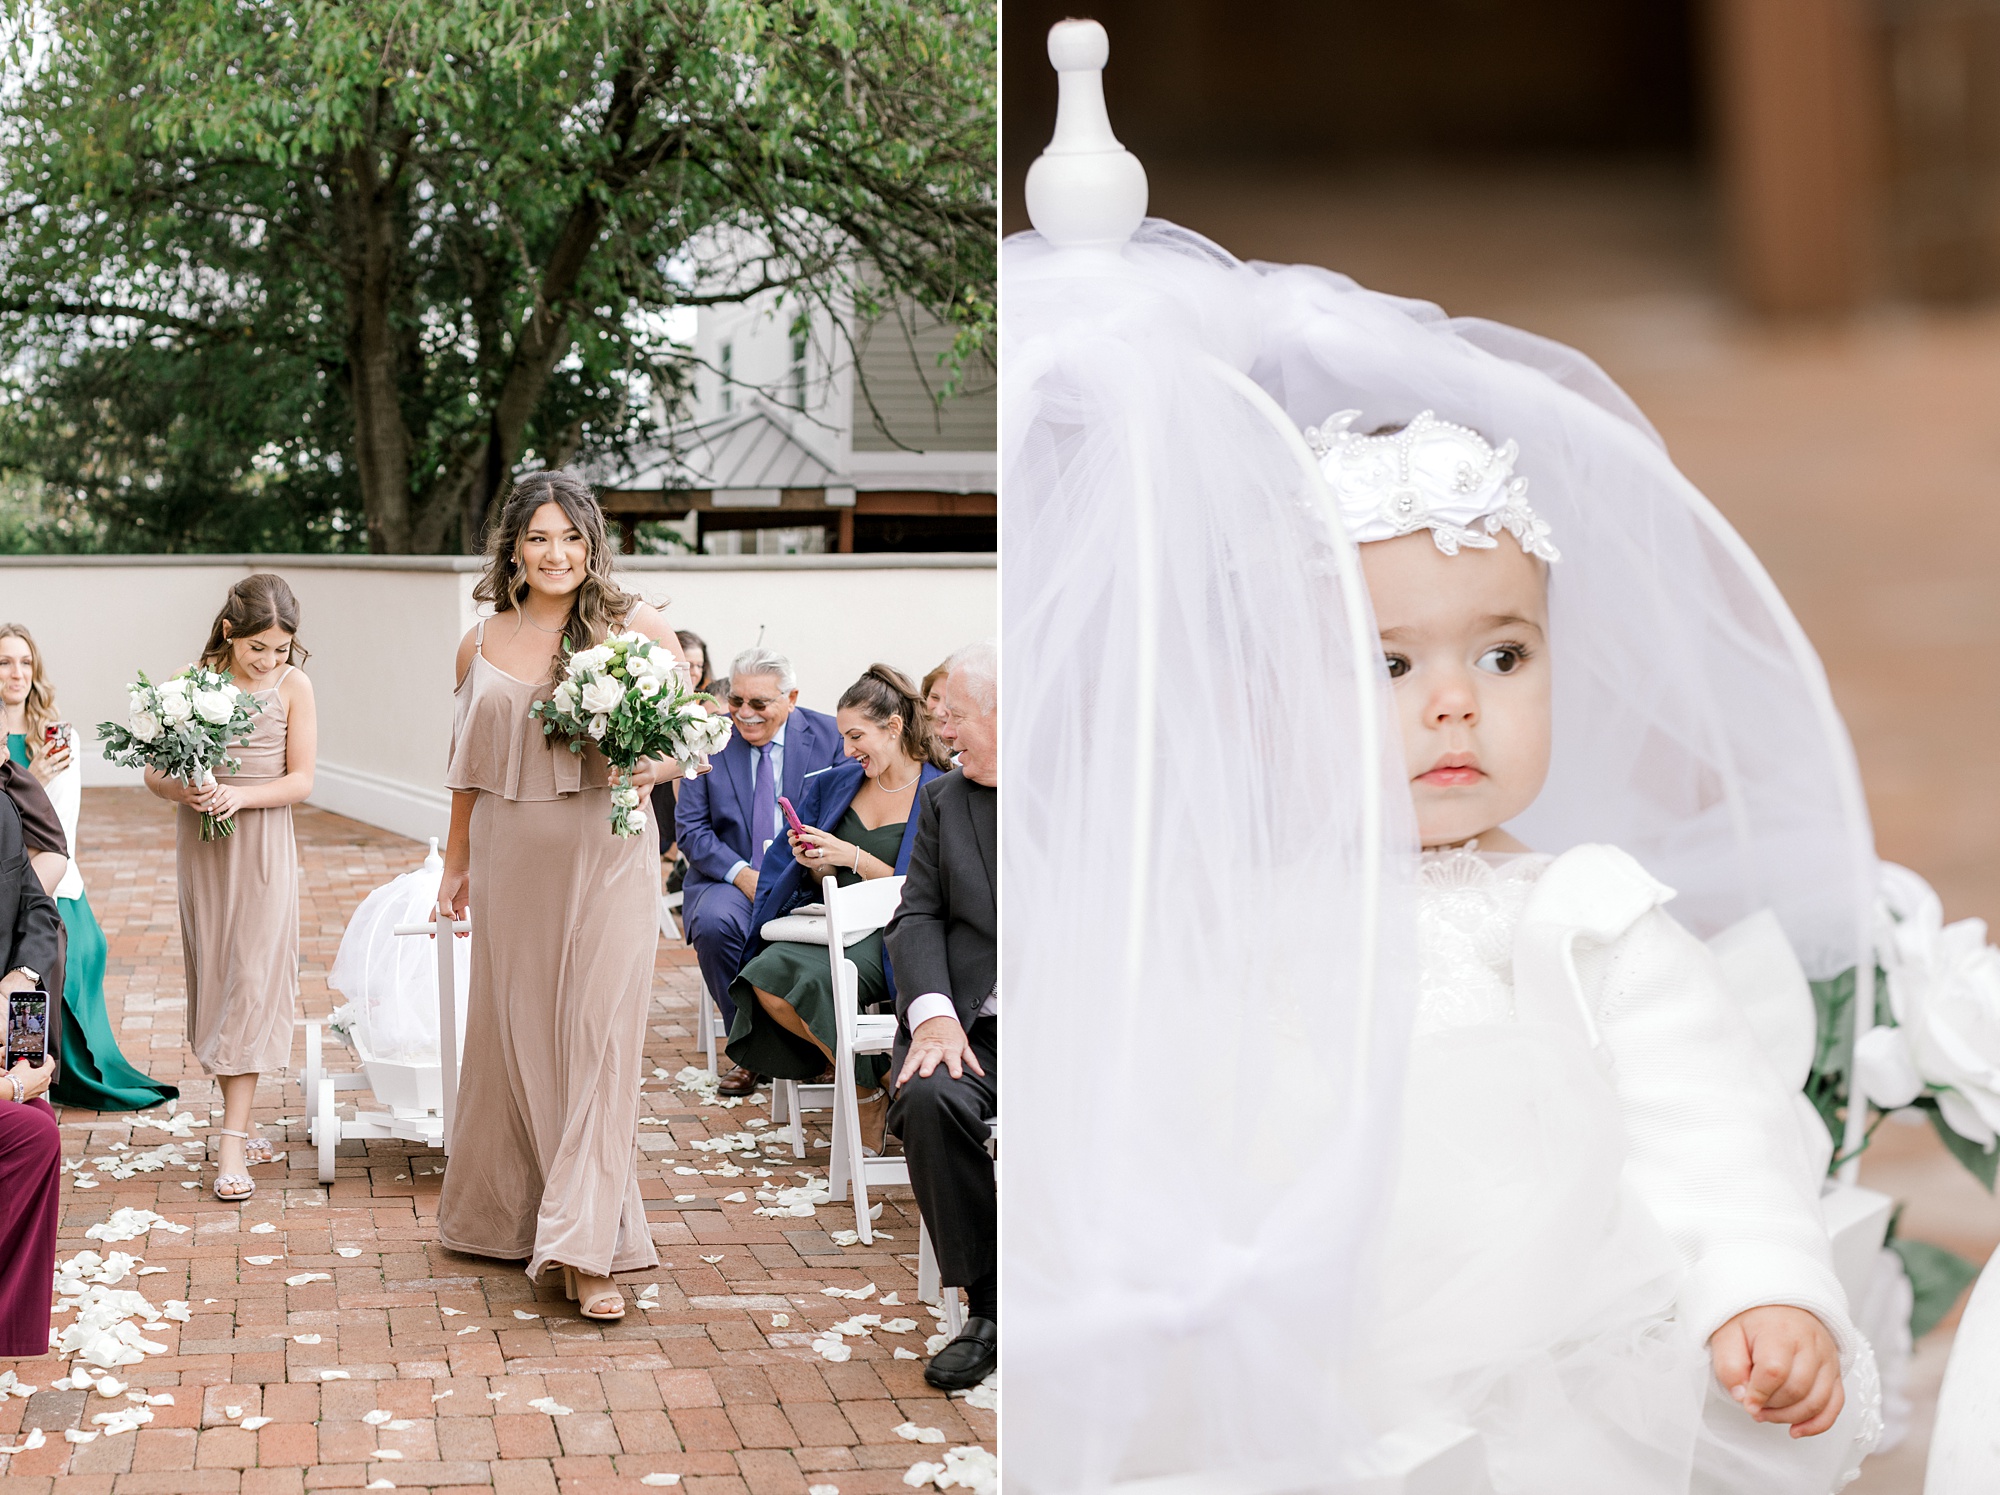 bridesmaids walk down aisle pulling wagon with flower girl during wedding ceremony at Ryland Inn on the patio